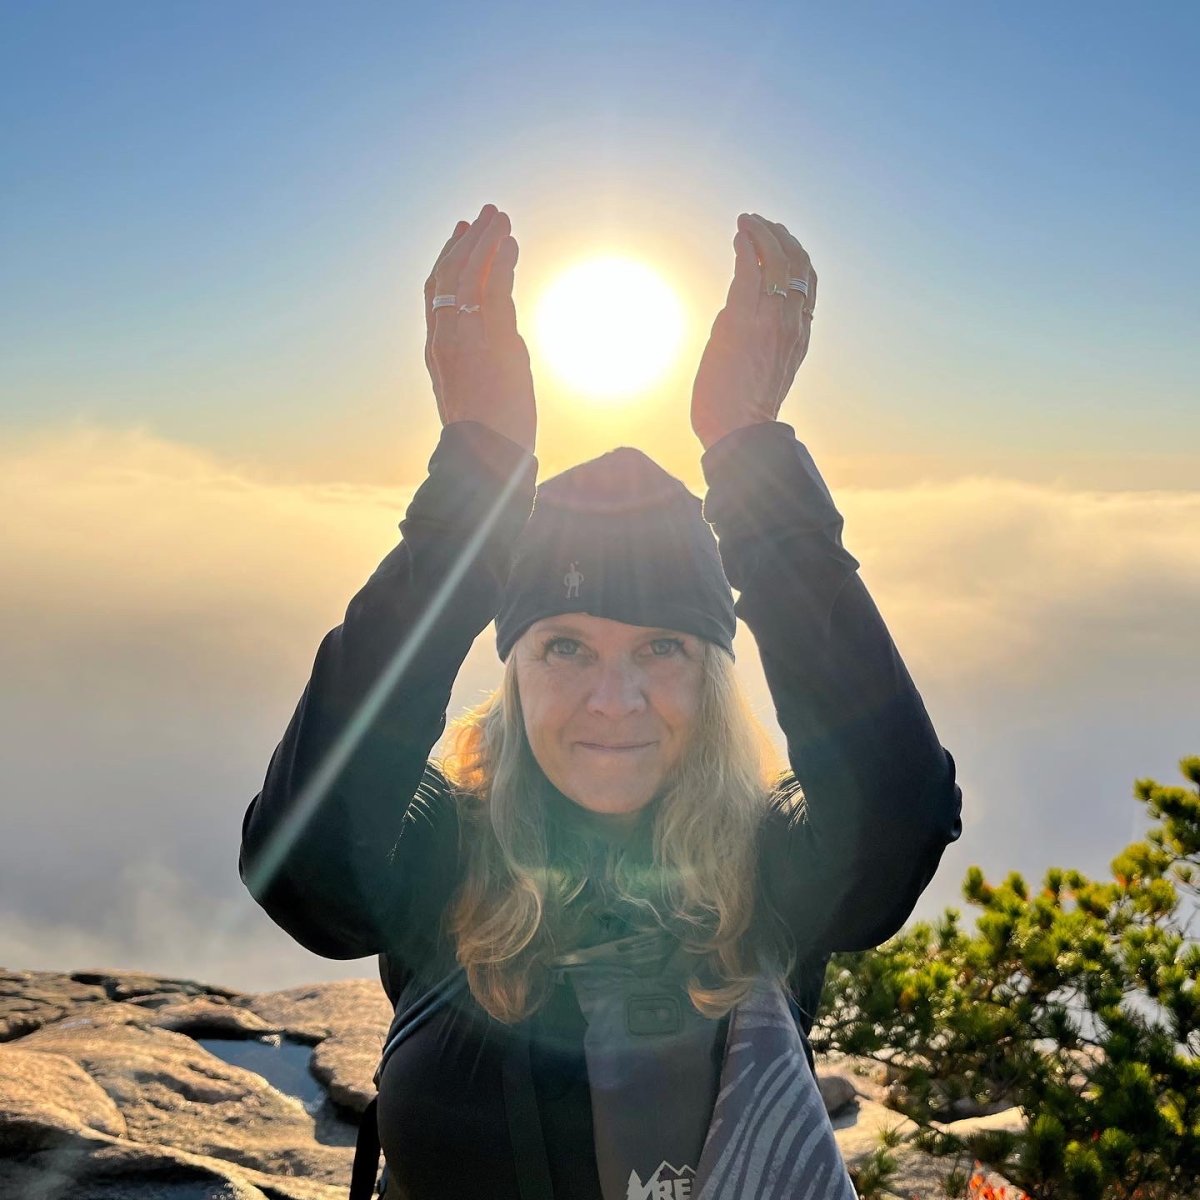 Jennifer poses with hands cupping the morning sun in Acadia National Park